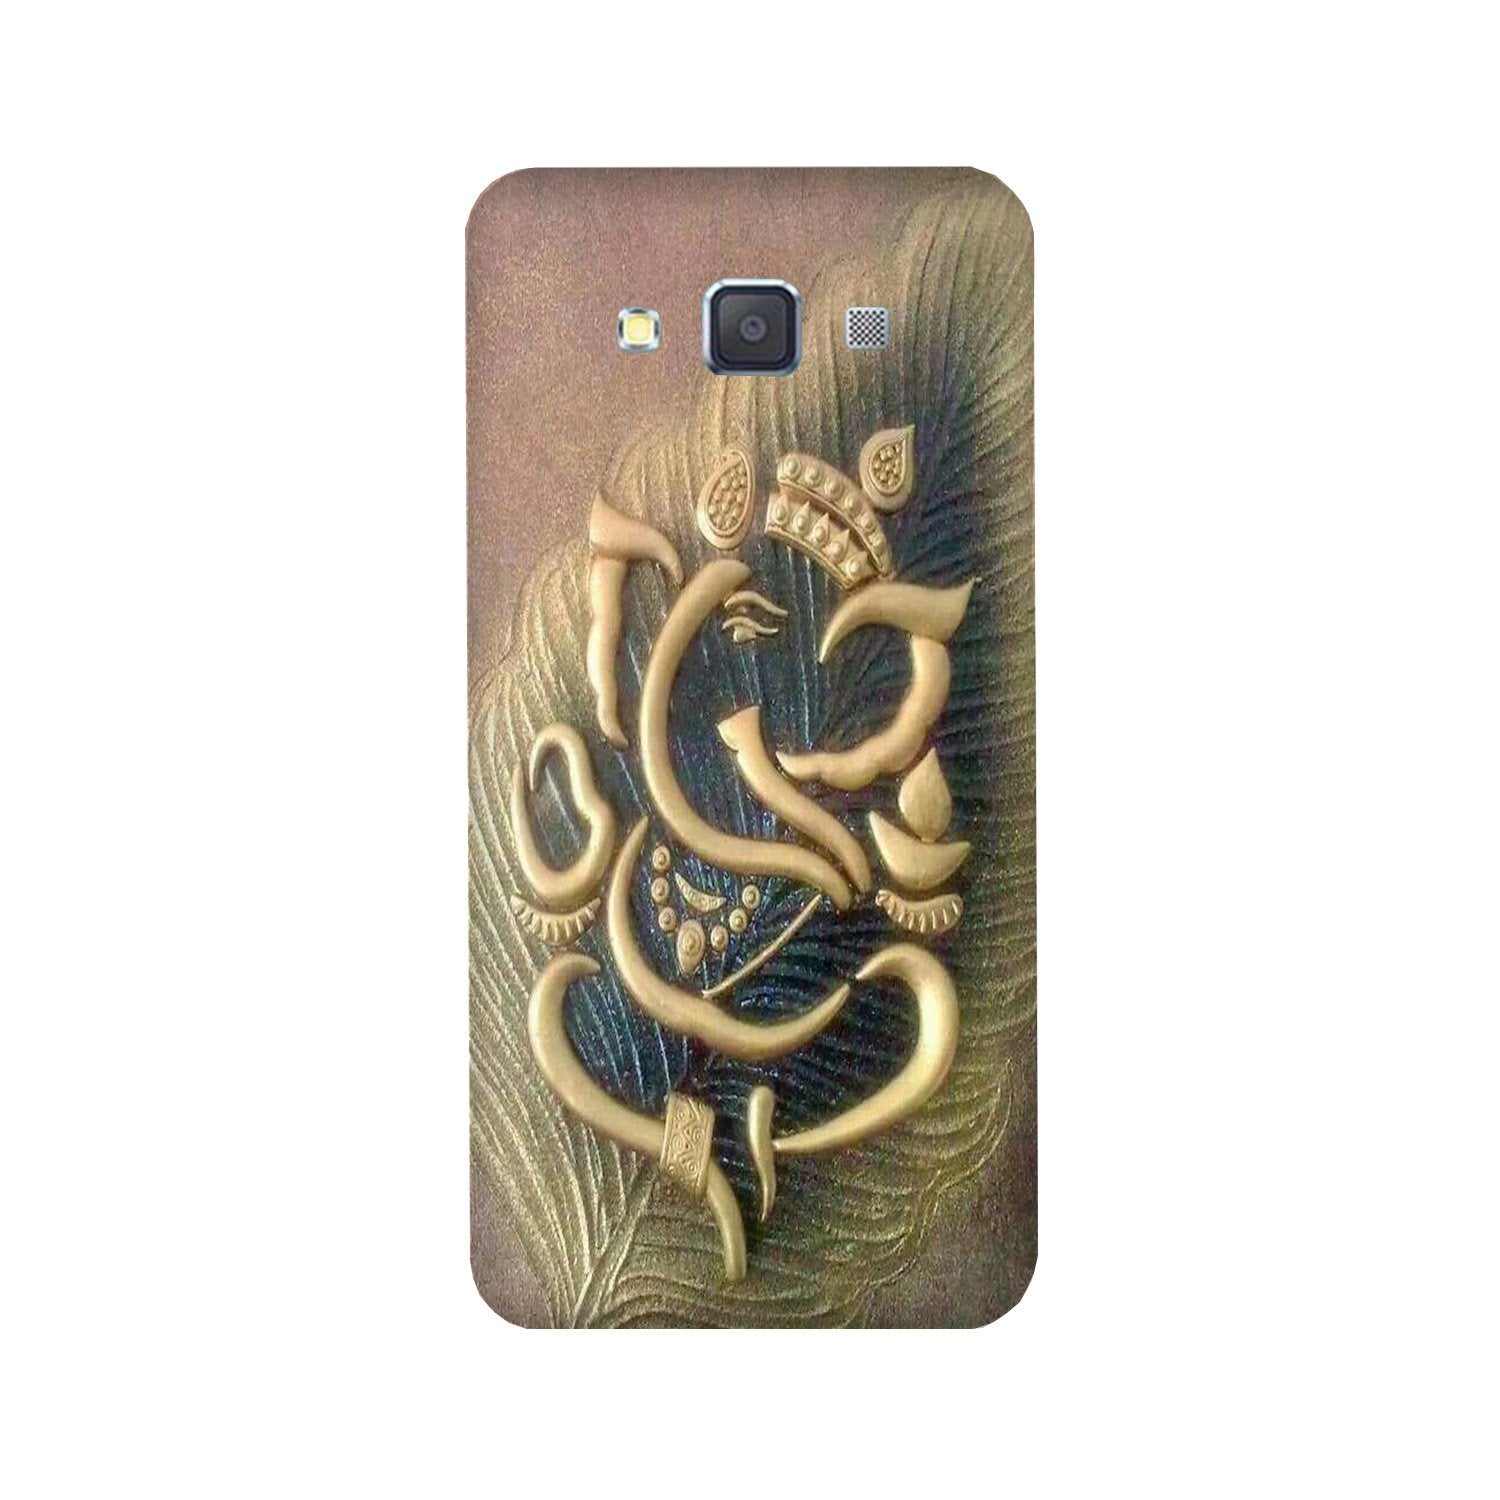 Lord Ganesha Case for Galaxy Grand Prime